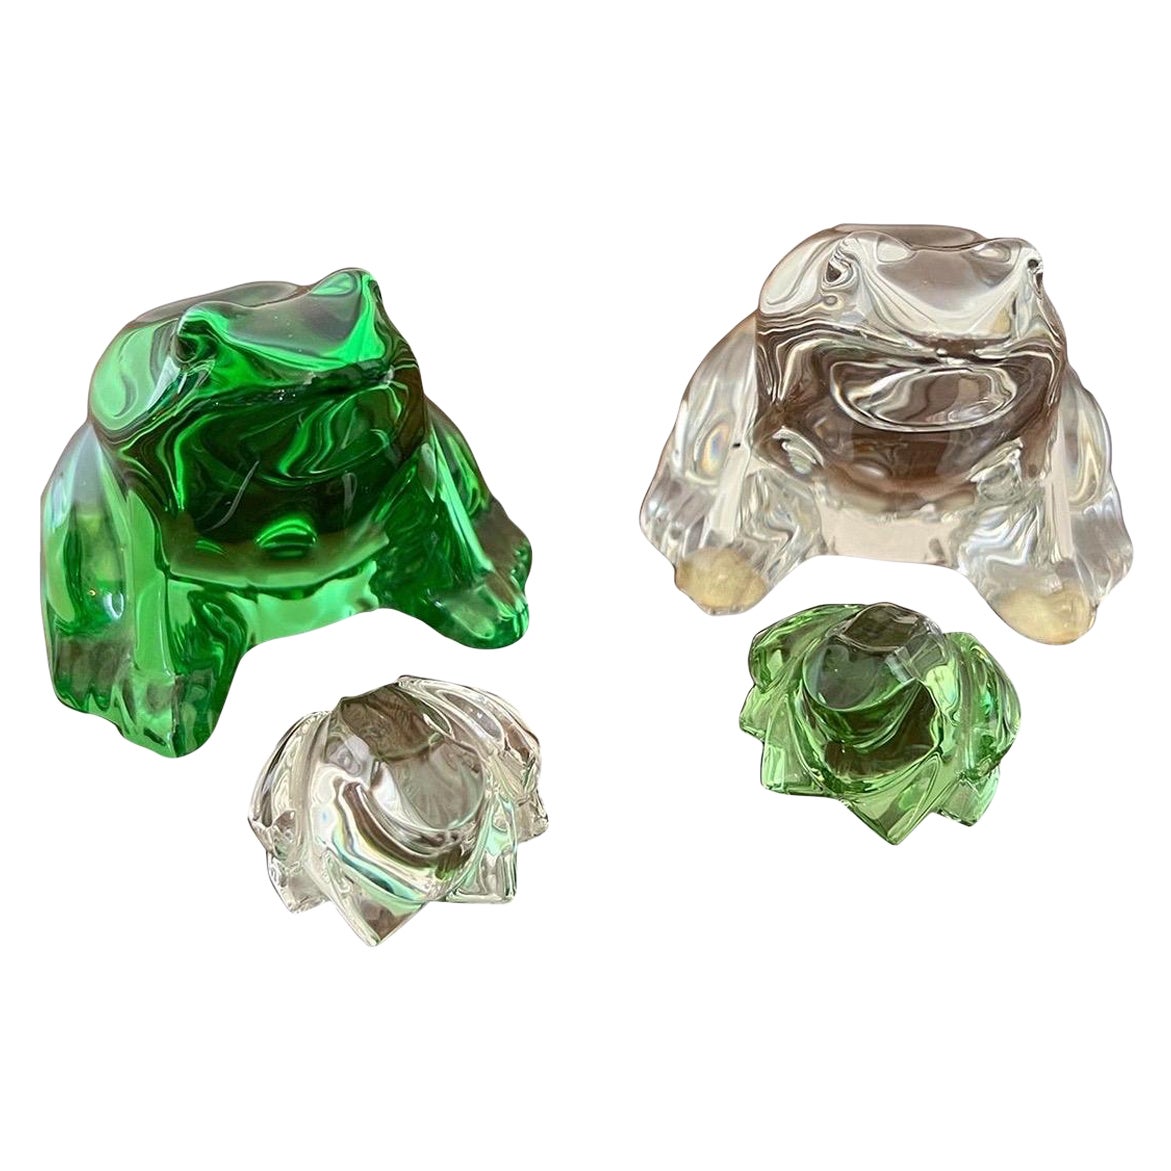 Baccarat France Crystal Frog Family in Green & Clear - 4 Piece Set